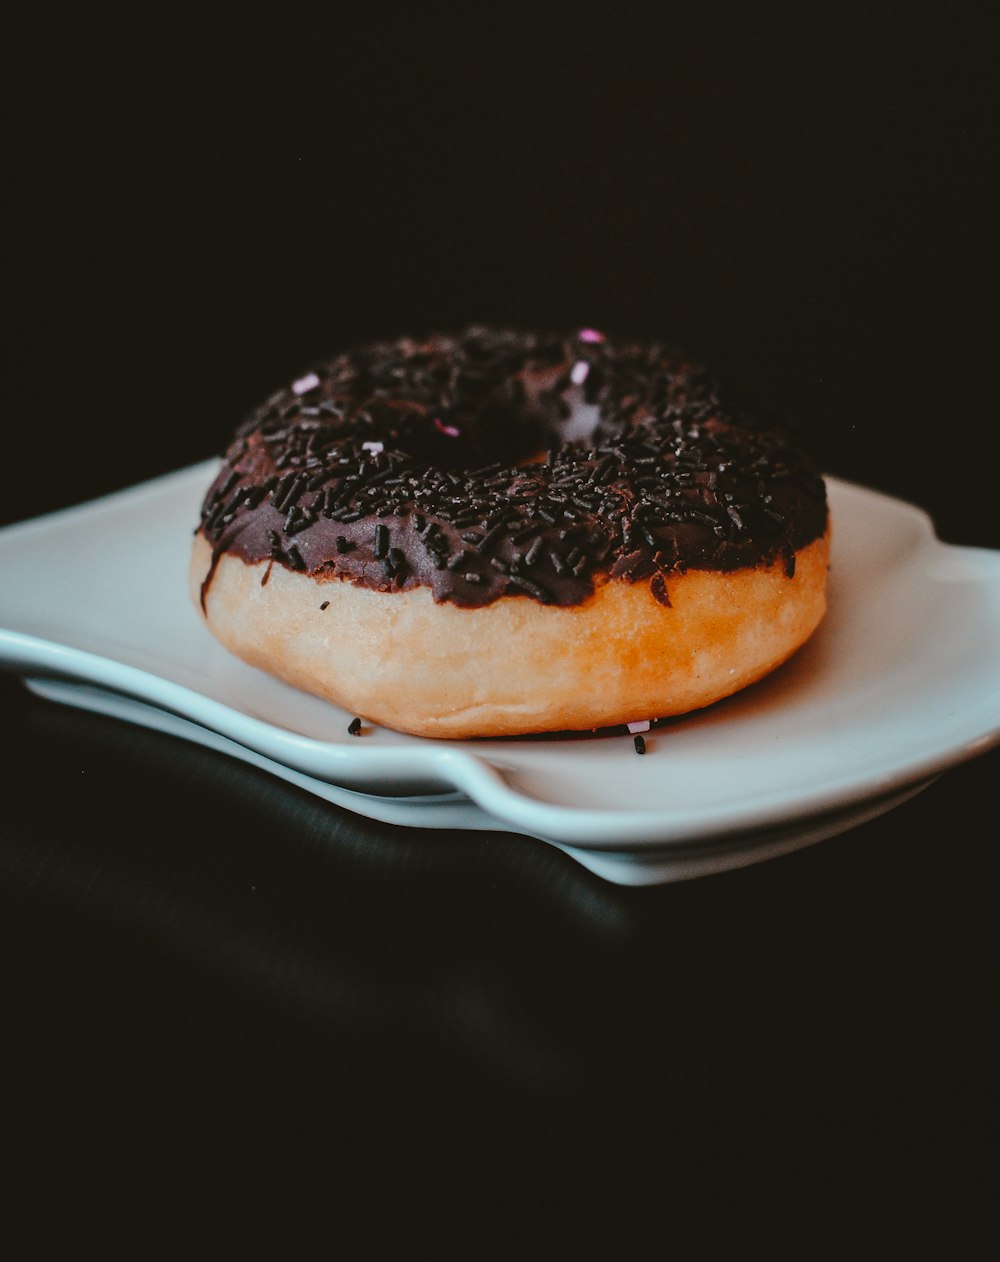 doughnut with chocolate toppings